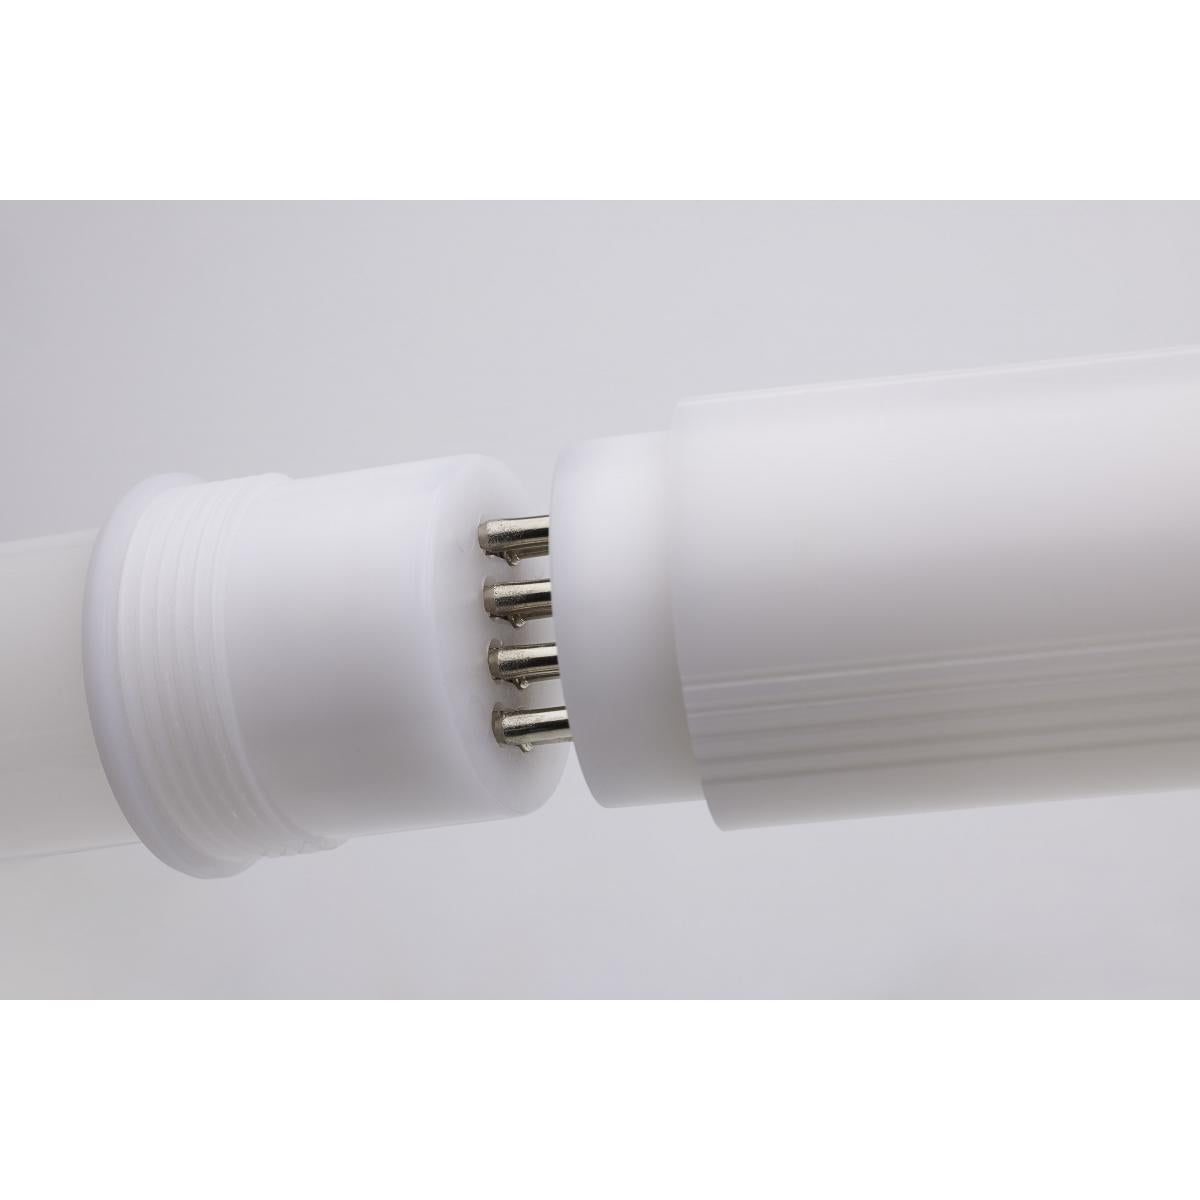 2-Piece 8ft T8 LED Bulb, 24/32/40 Wattage Selectable, 5500 Lumens, Selectable CCT 3000K to 6500K, FA8 base, Ballast Bypass, Double End (Case Of 10)